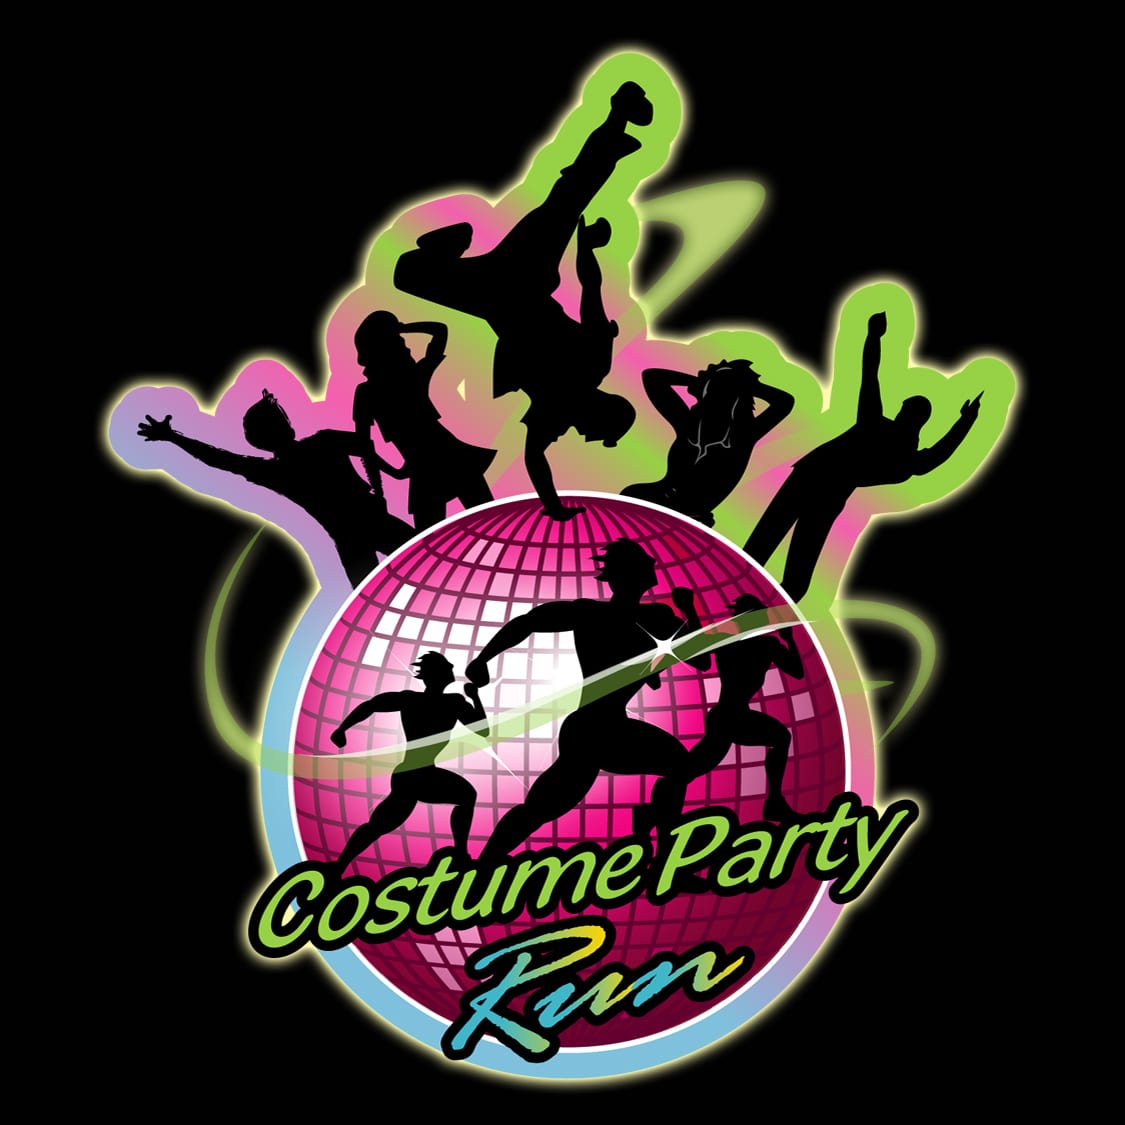 Costume Party Run logo on RaceRaves